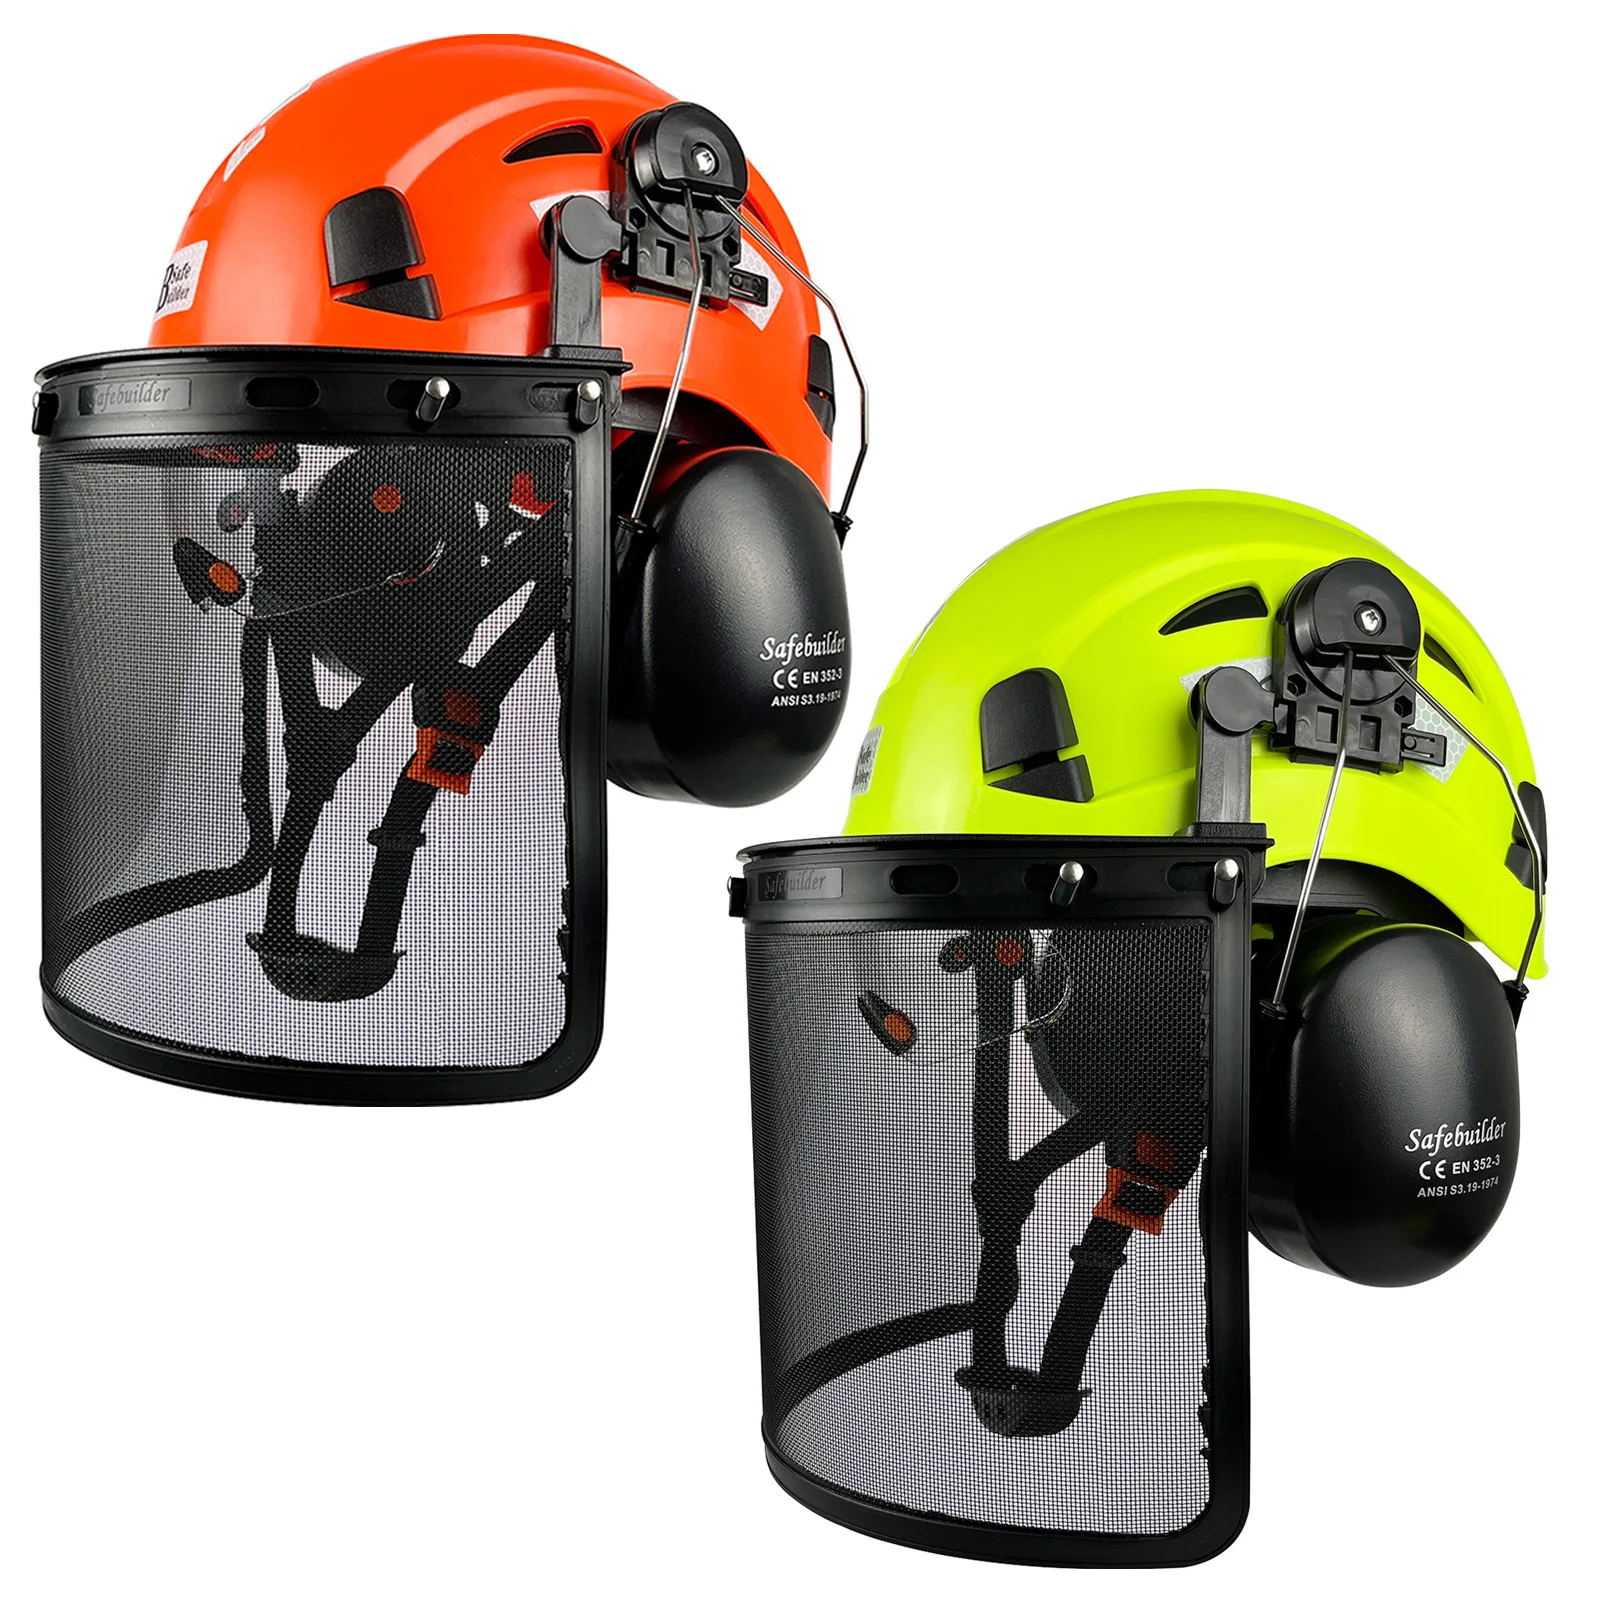 best-forestry-industrial-safety-helmet-with-visor-mesh-face-shield-earmuffs-reflective-chainsaw-cutting-wood-work-hard-hat-abs